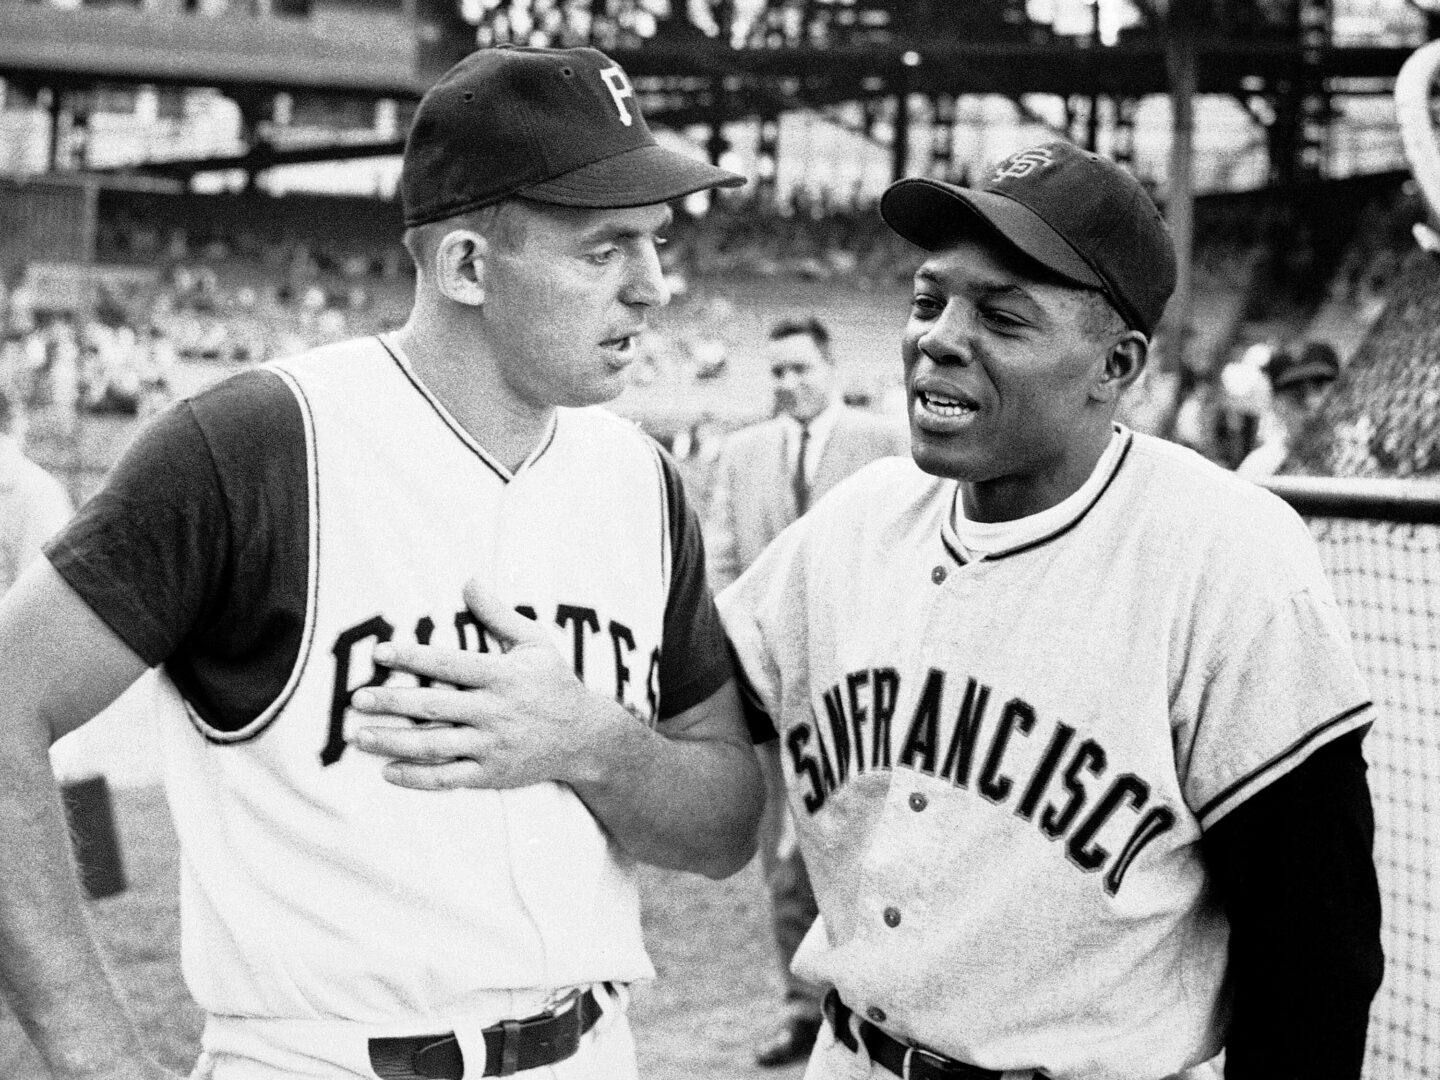 San Francisco Giants' Willie Mays, right, listens as Pittsburgh Pirates' Frank Thomas, left, discusses hitting prior to their baseball game June 17, 1958, in Pittsburgh.